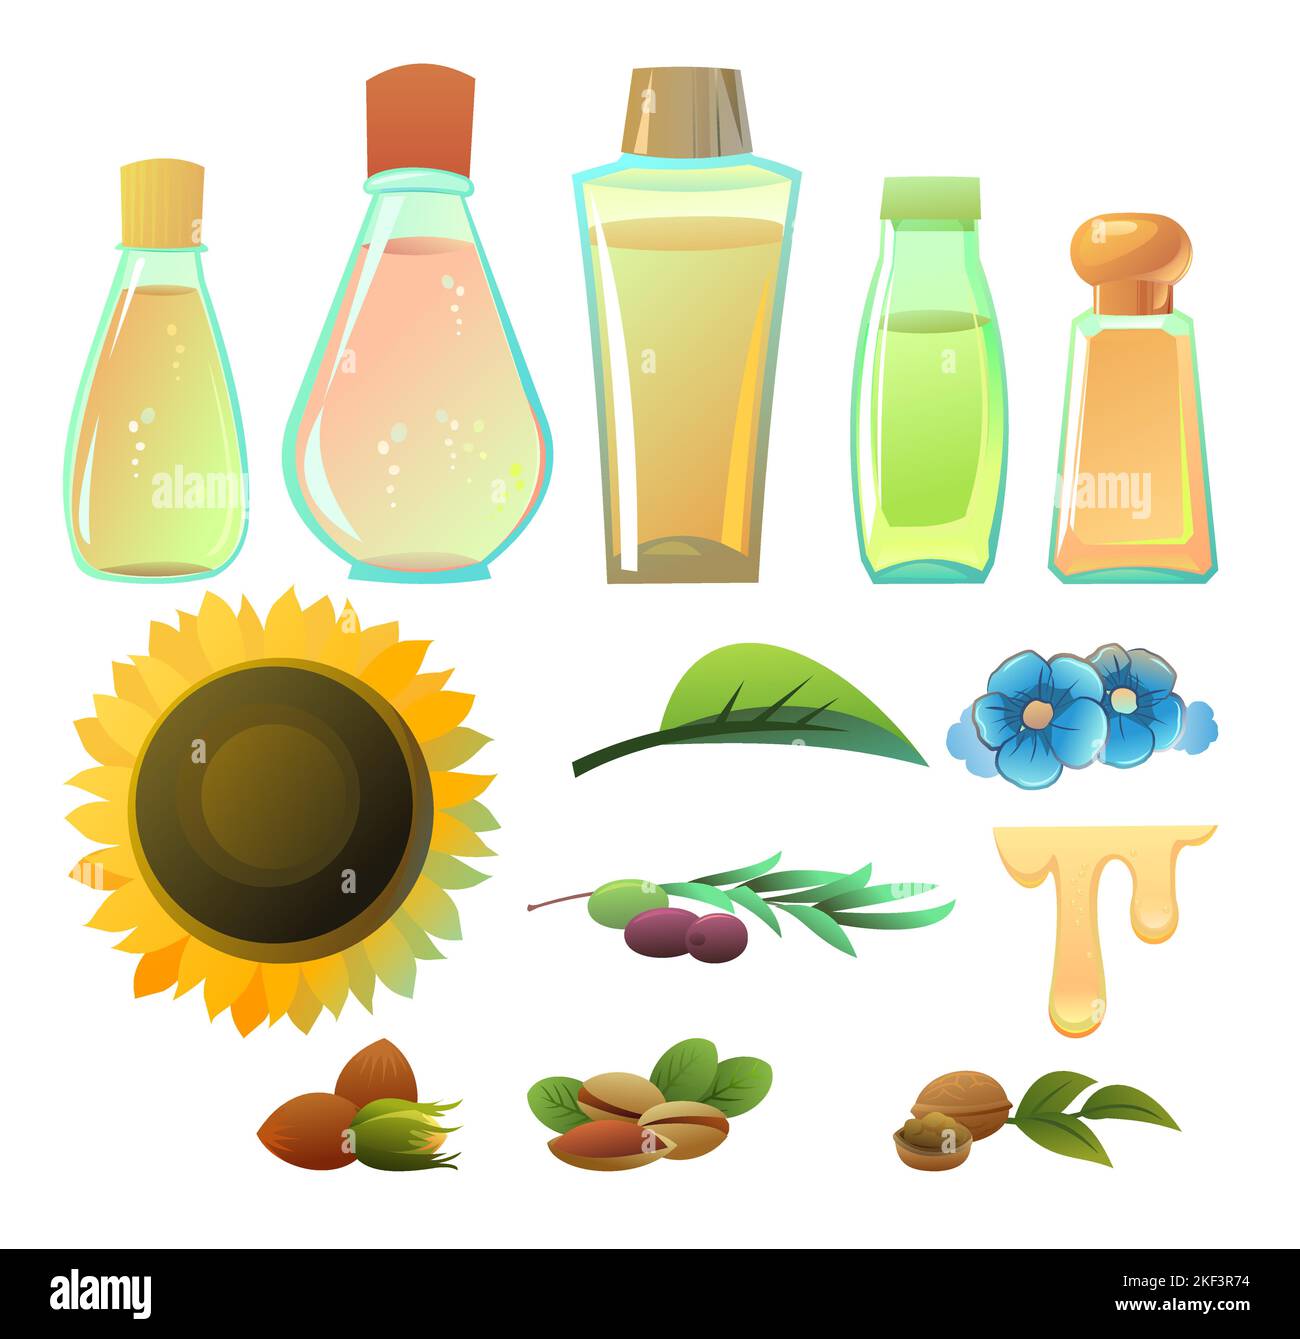 Set of natural oils objects. Extracted from nuts and plant seeds. Ecologically clean natural food. Product for healthy lifestyle and cooking. Isolated Stock Vector